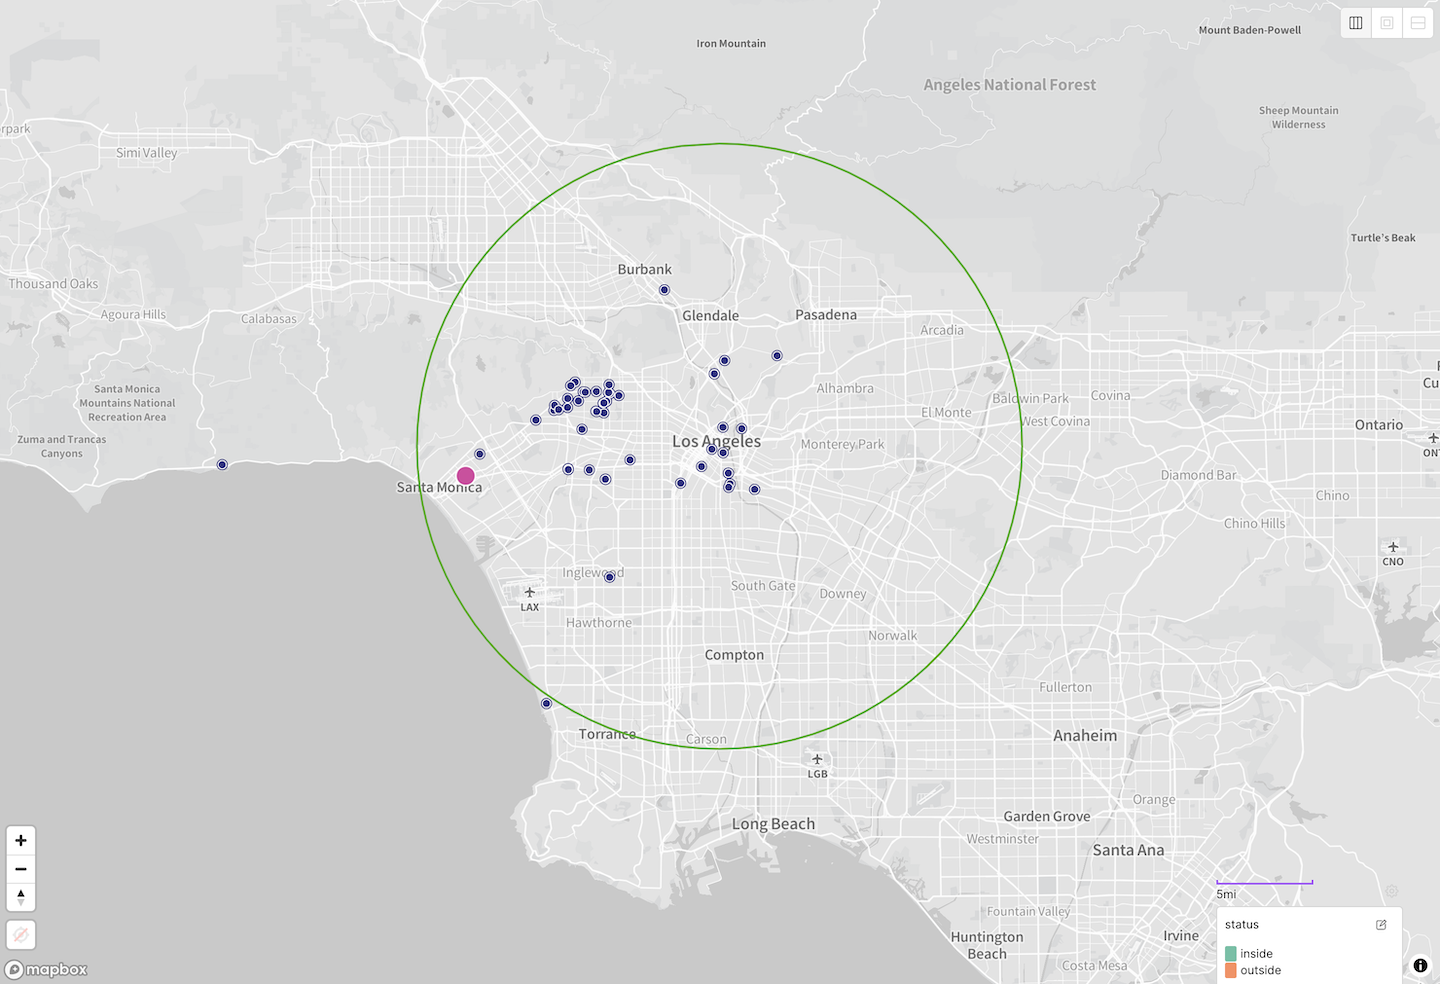 Screenshot of a visualization in Placemark showing Los Angeles area exhibitions within a 50km radius, with a 25km radius superimposed.